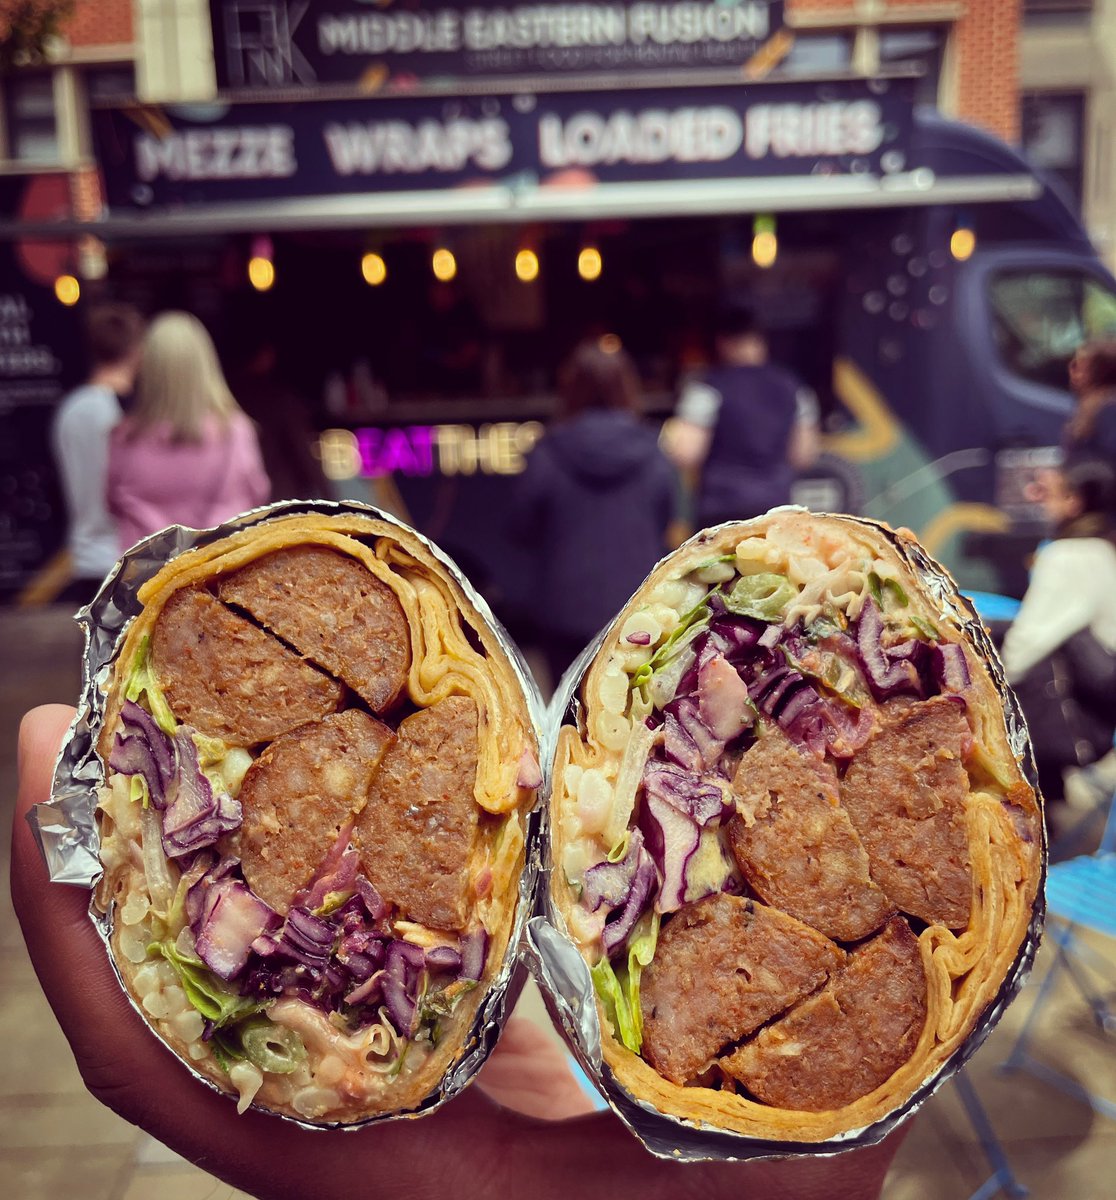 THIS WEEK’S MARKET PLACE LUNCHTIME LINEUP, FEATURING: WEDS 👉FINK STREET FOOD🌯 👉KRUA KOSON🇹🇭 👉SPENGLER’S DELI🥪 👉PITTA PITTA🇬🇷 👉THE CURRY MAN🥘 👉TAPAS CULTURE PAELLA🇪🇸 👉DIRTY SNAX🍟